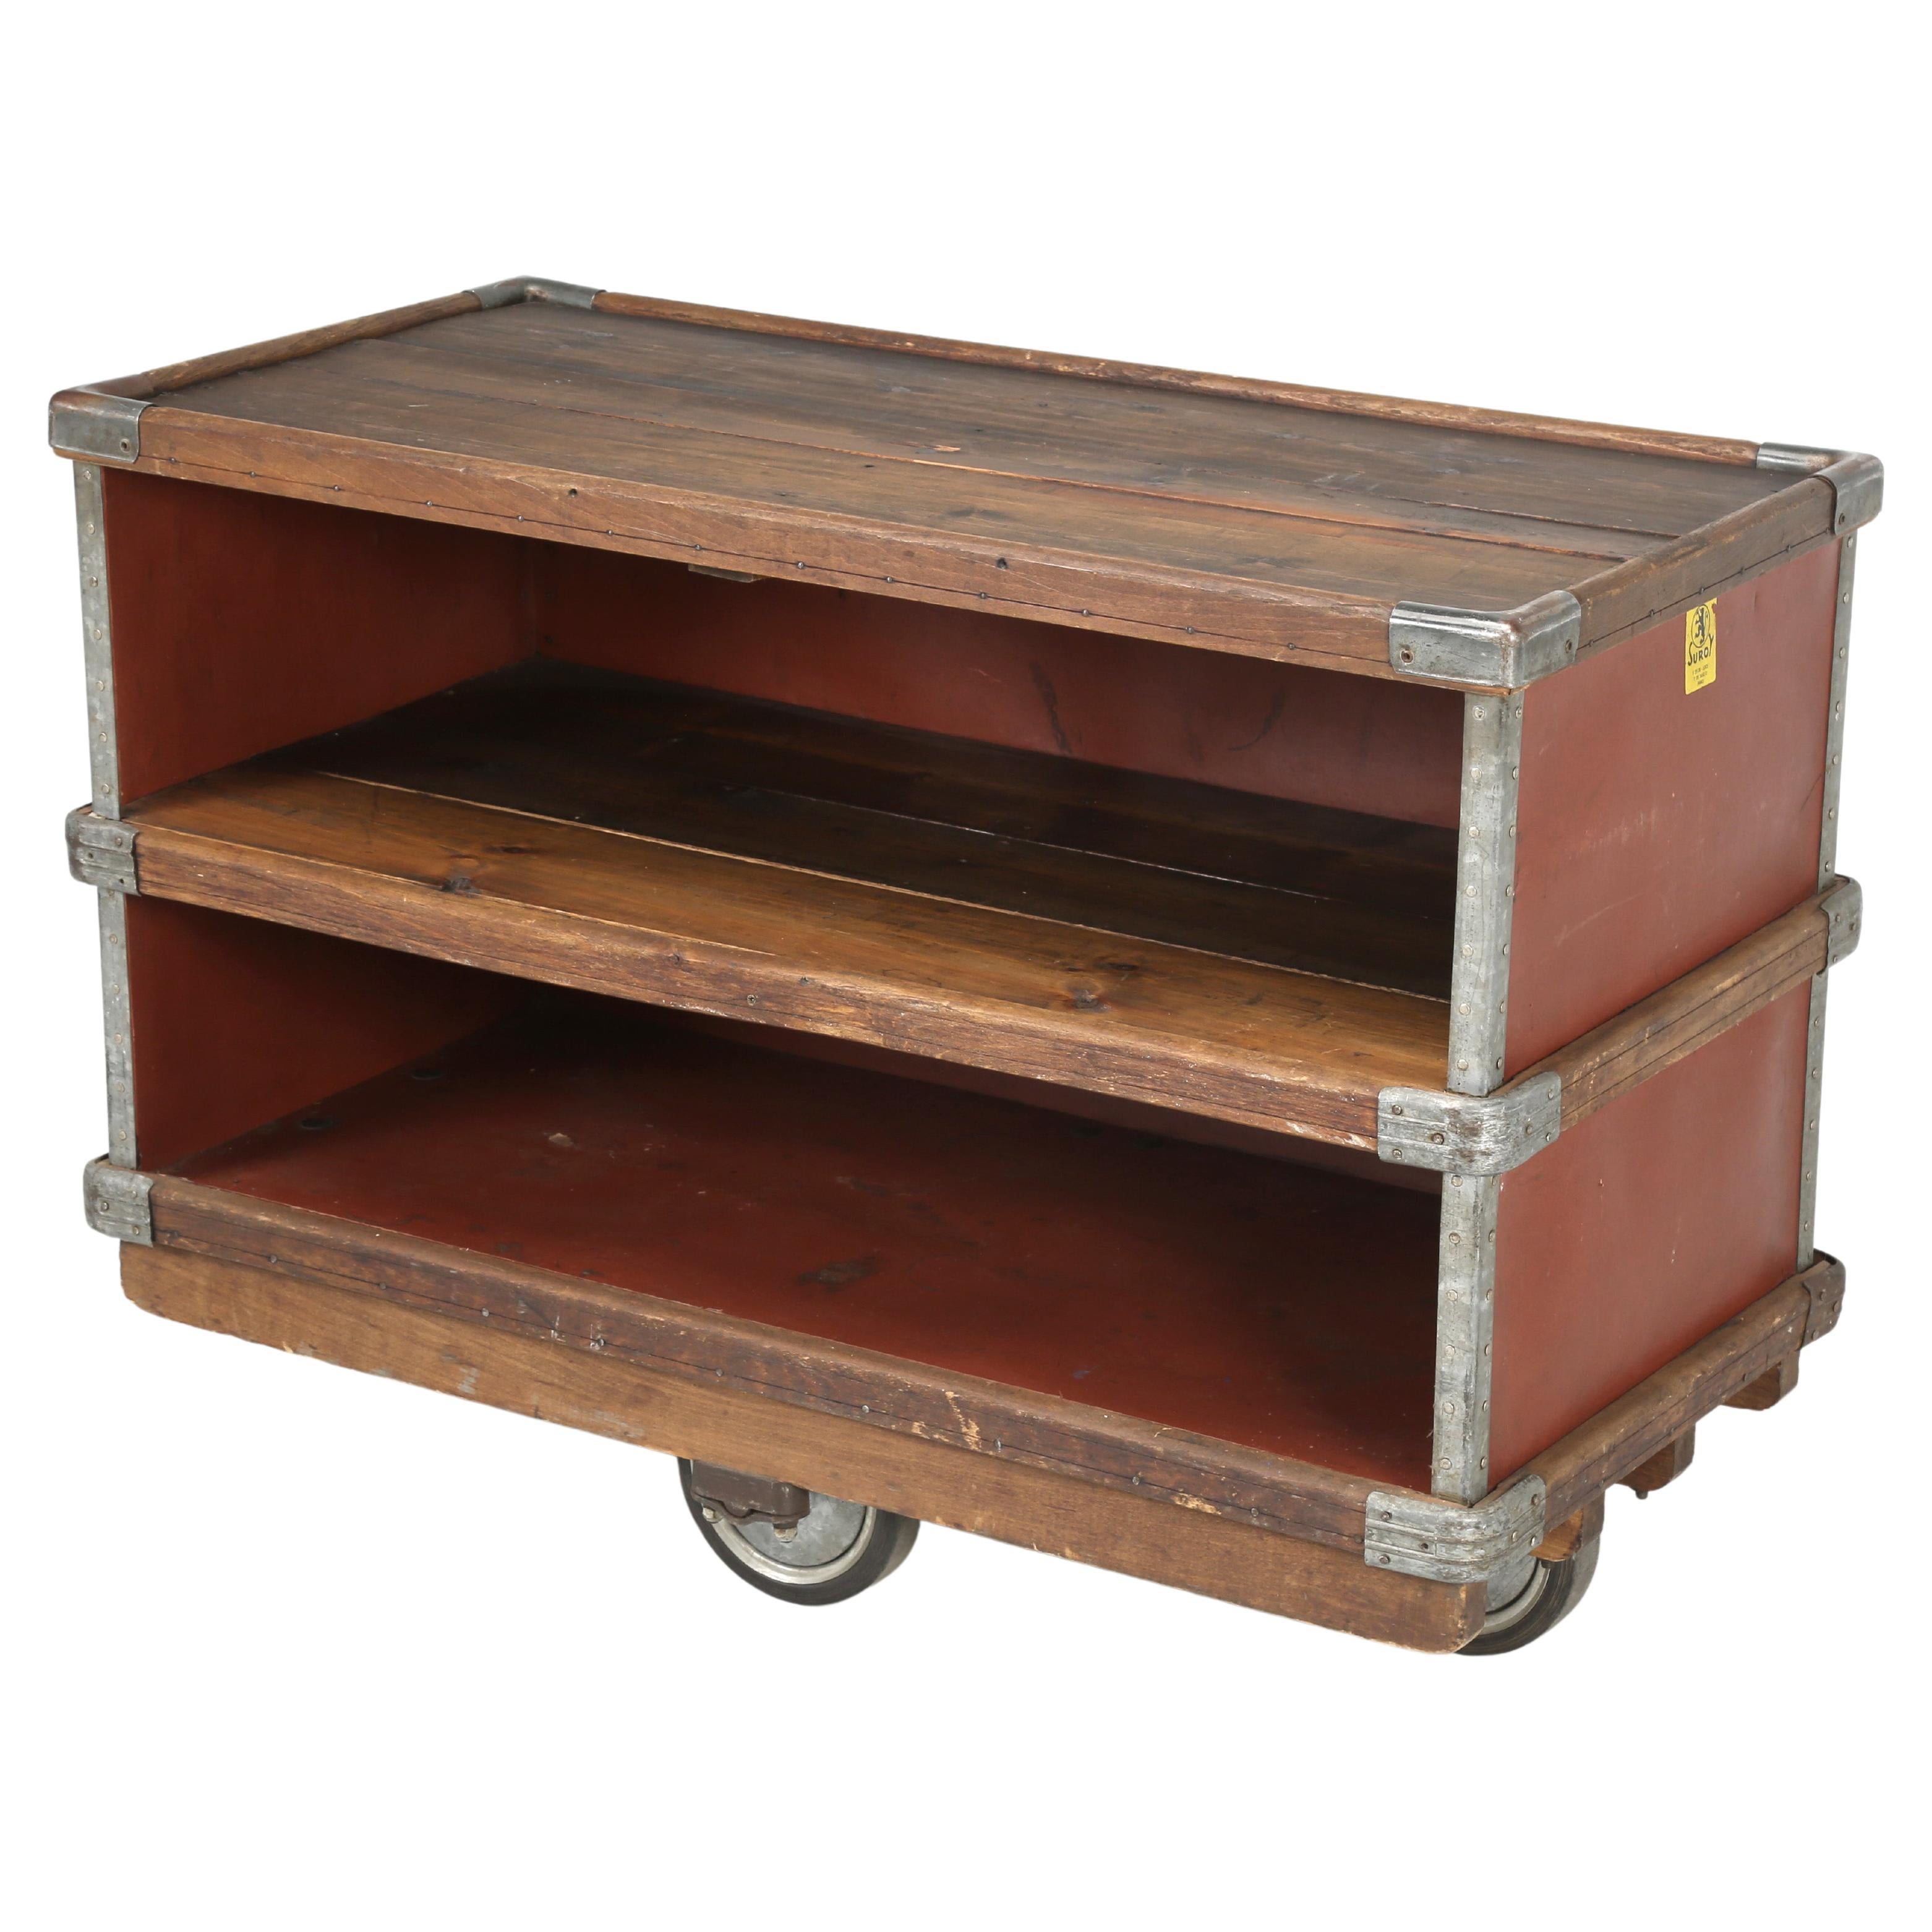 Suroy Industrial Cart on Wheels or Potentially a Sensational Movable Bar Cart